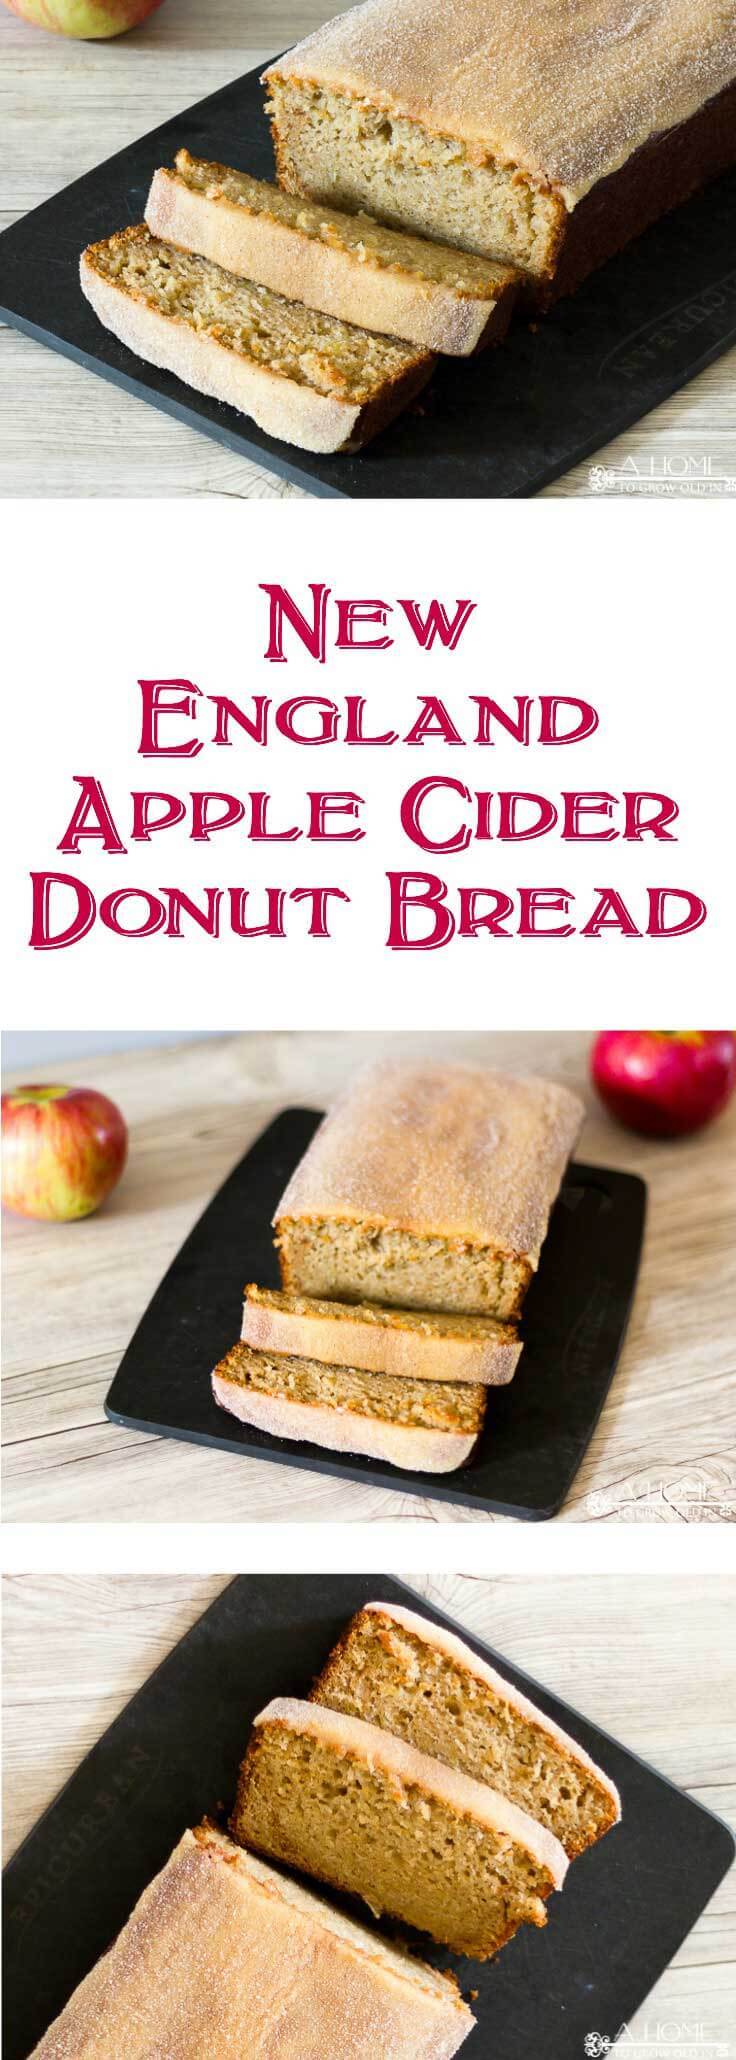 This apple cider donut bread recipe is a delicious twist on a New England fall classic! The bread is so moist, and the apple cider glaze with cinnamon sugar topping is mouthwatering! This is definitely one you'll want to pin for later!